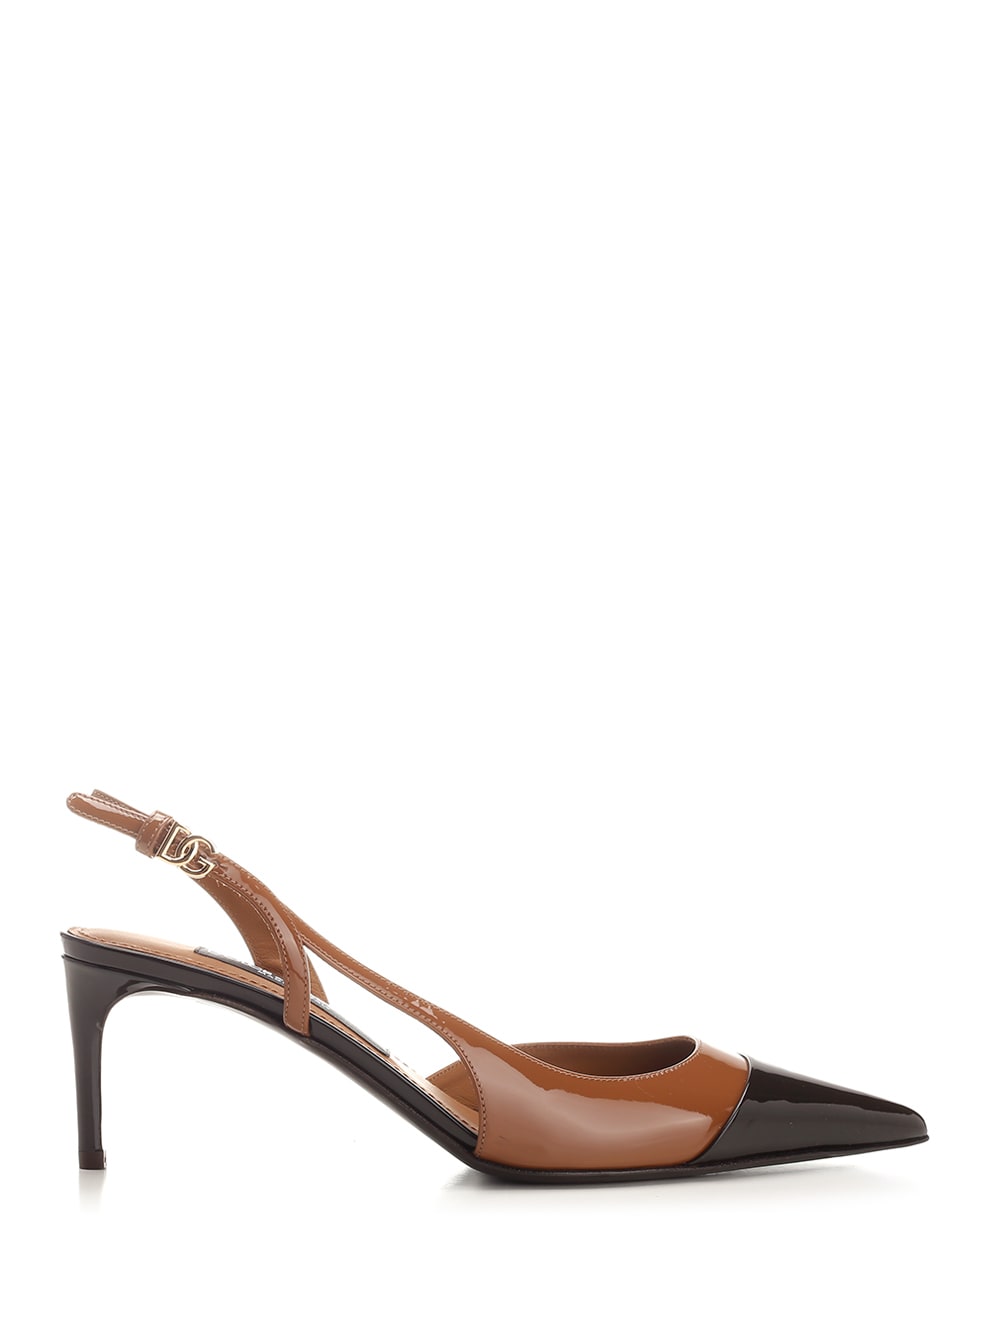 DOLCE & GABBANA TWO-TONE PATENT LEATHER SLINGBACK